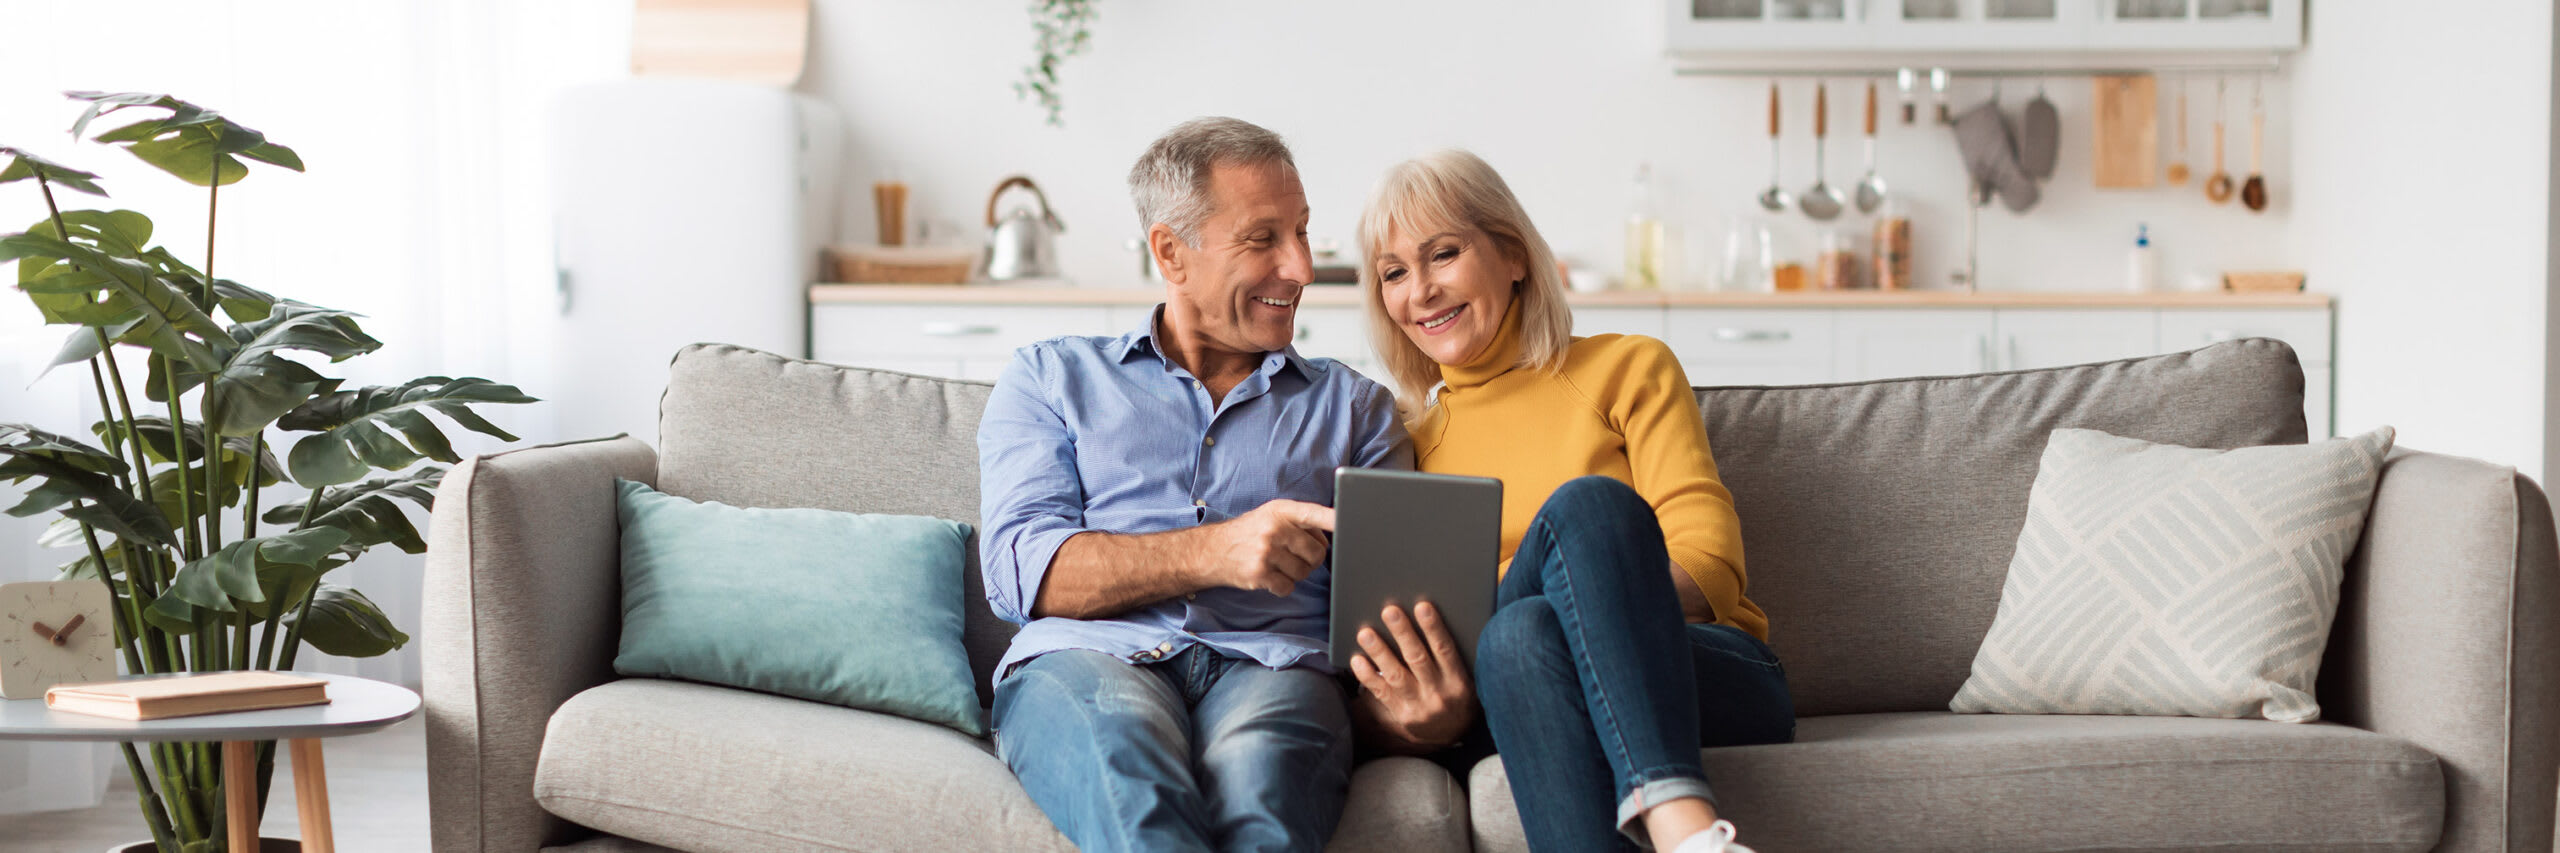 A senior couple sitting on a couch while reviewing information on a tablet